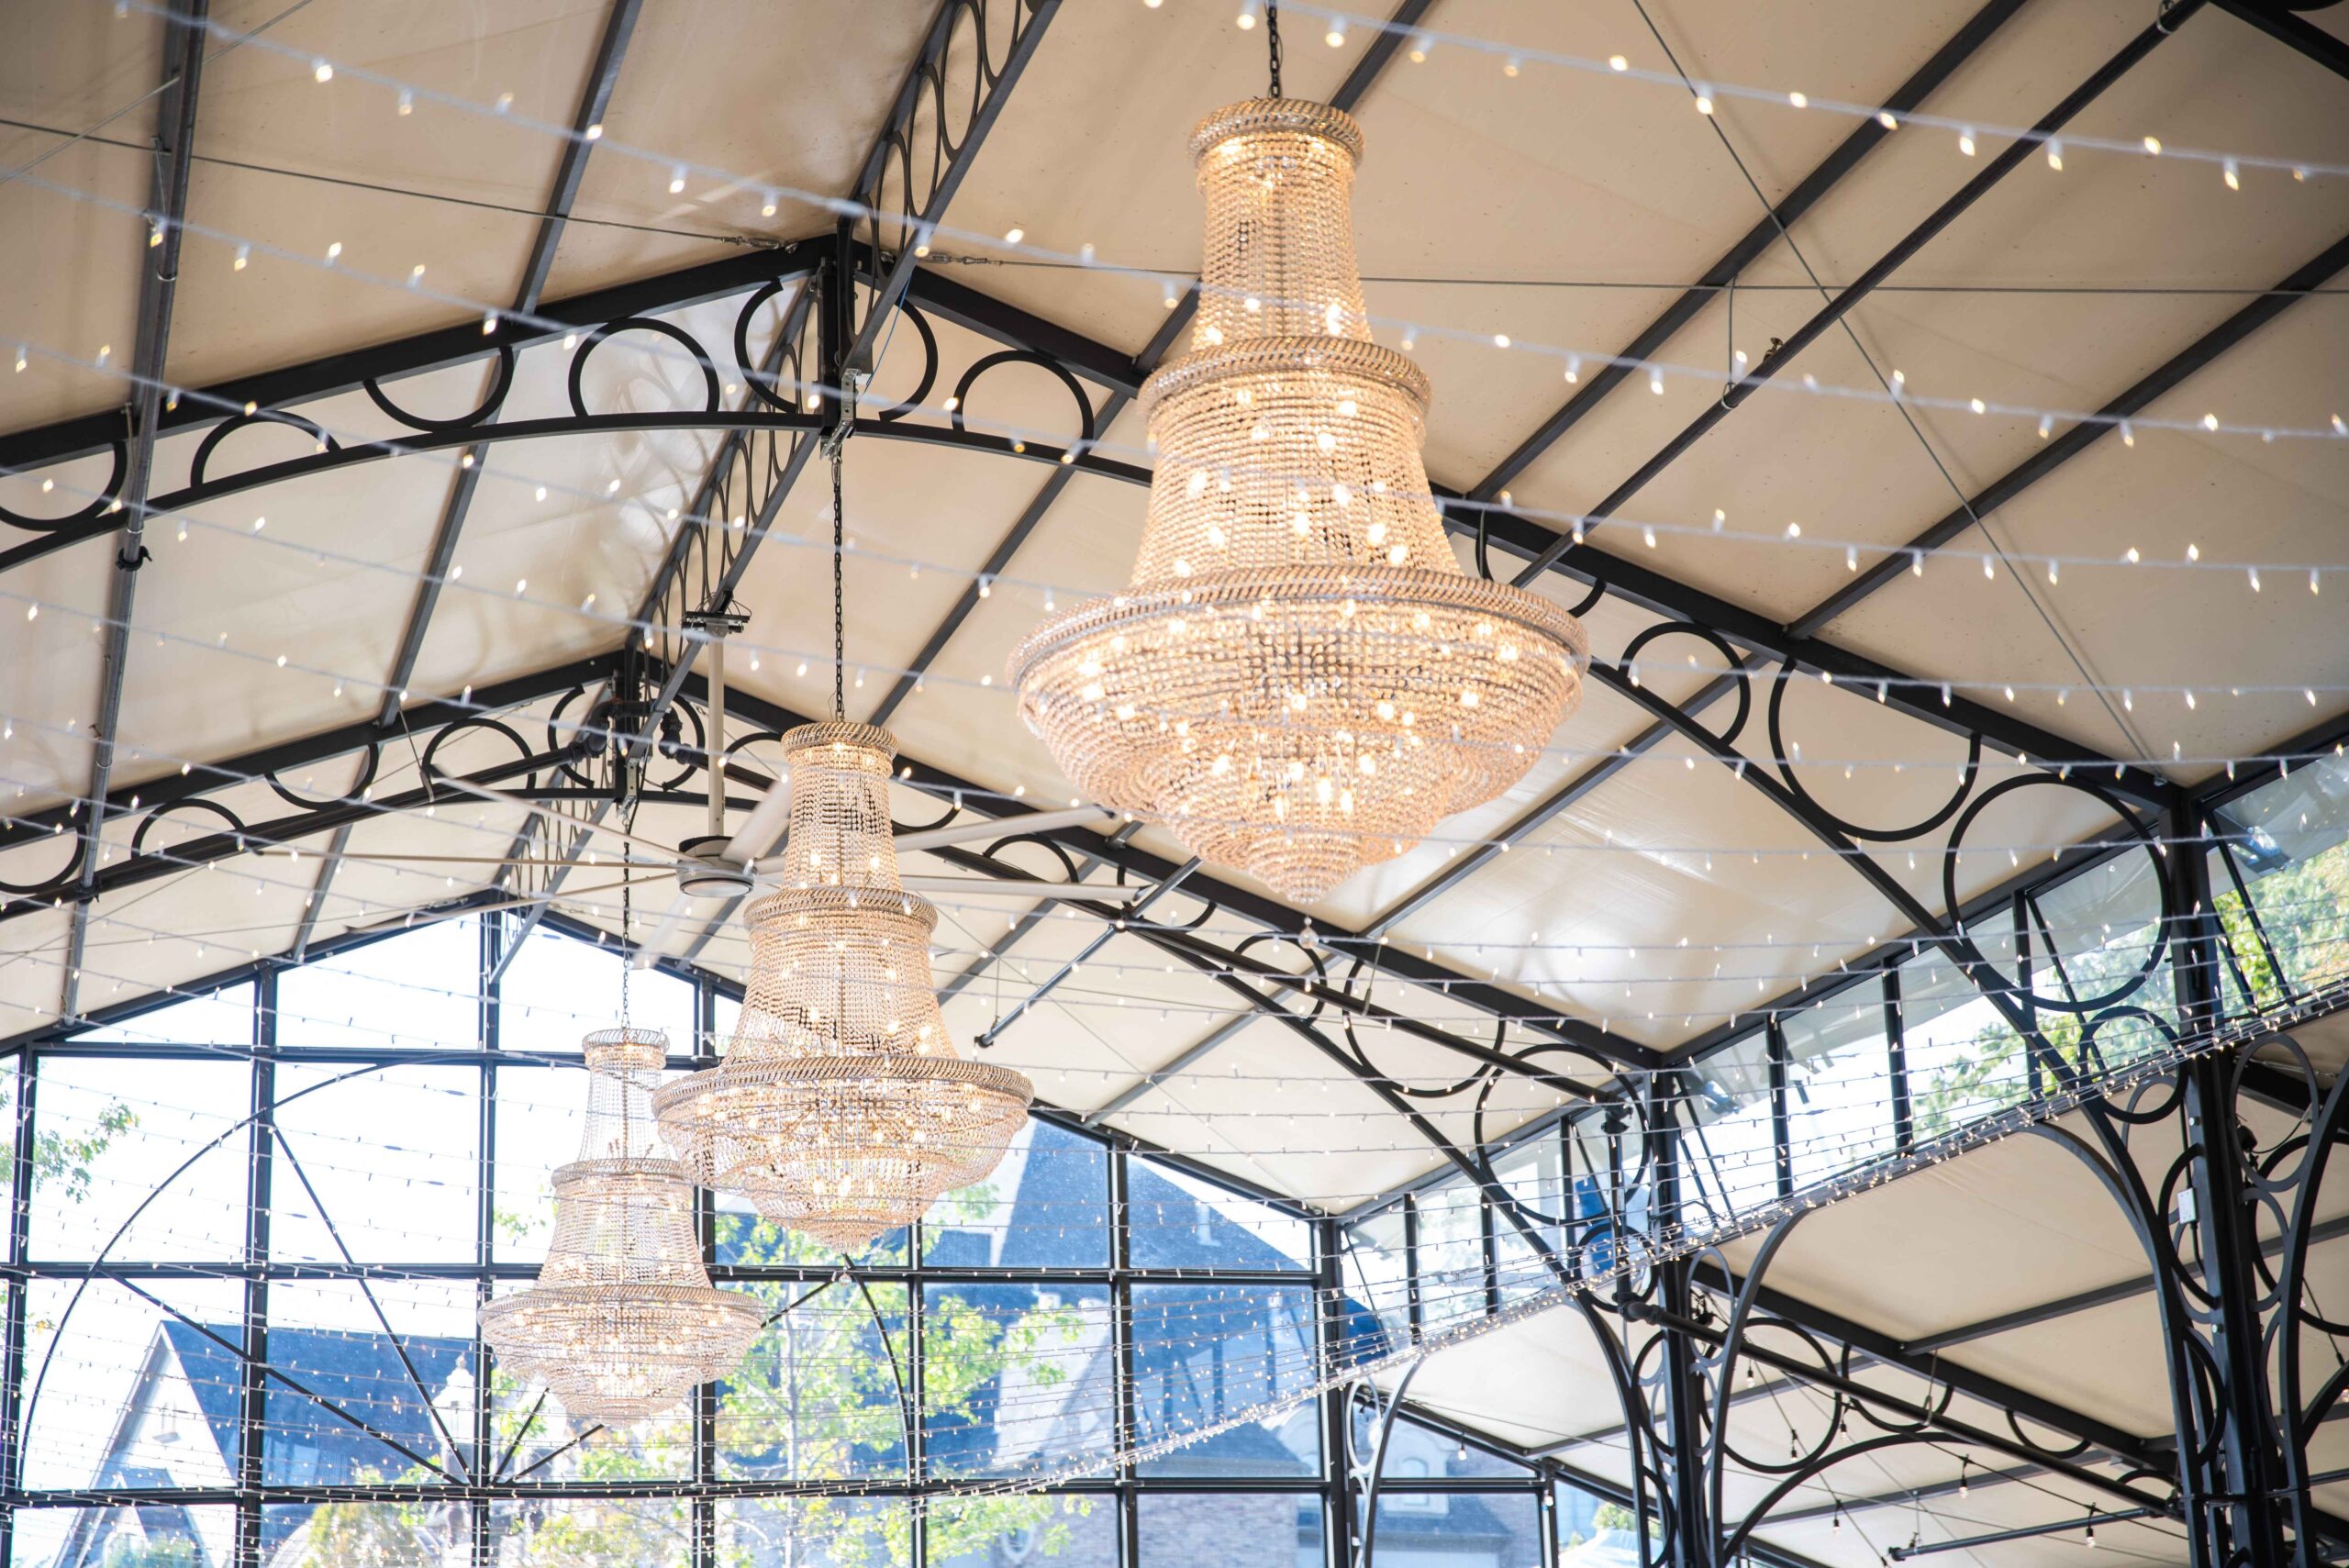 Chandeliers and lights hanging at Avent Orangery, a greenhouse wedding venue in Kansas City